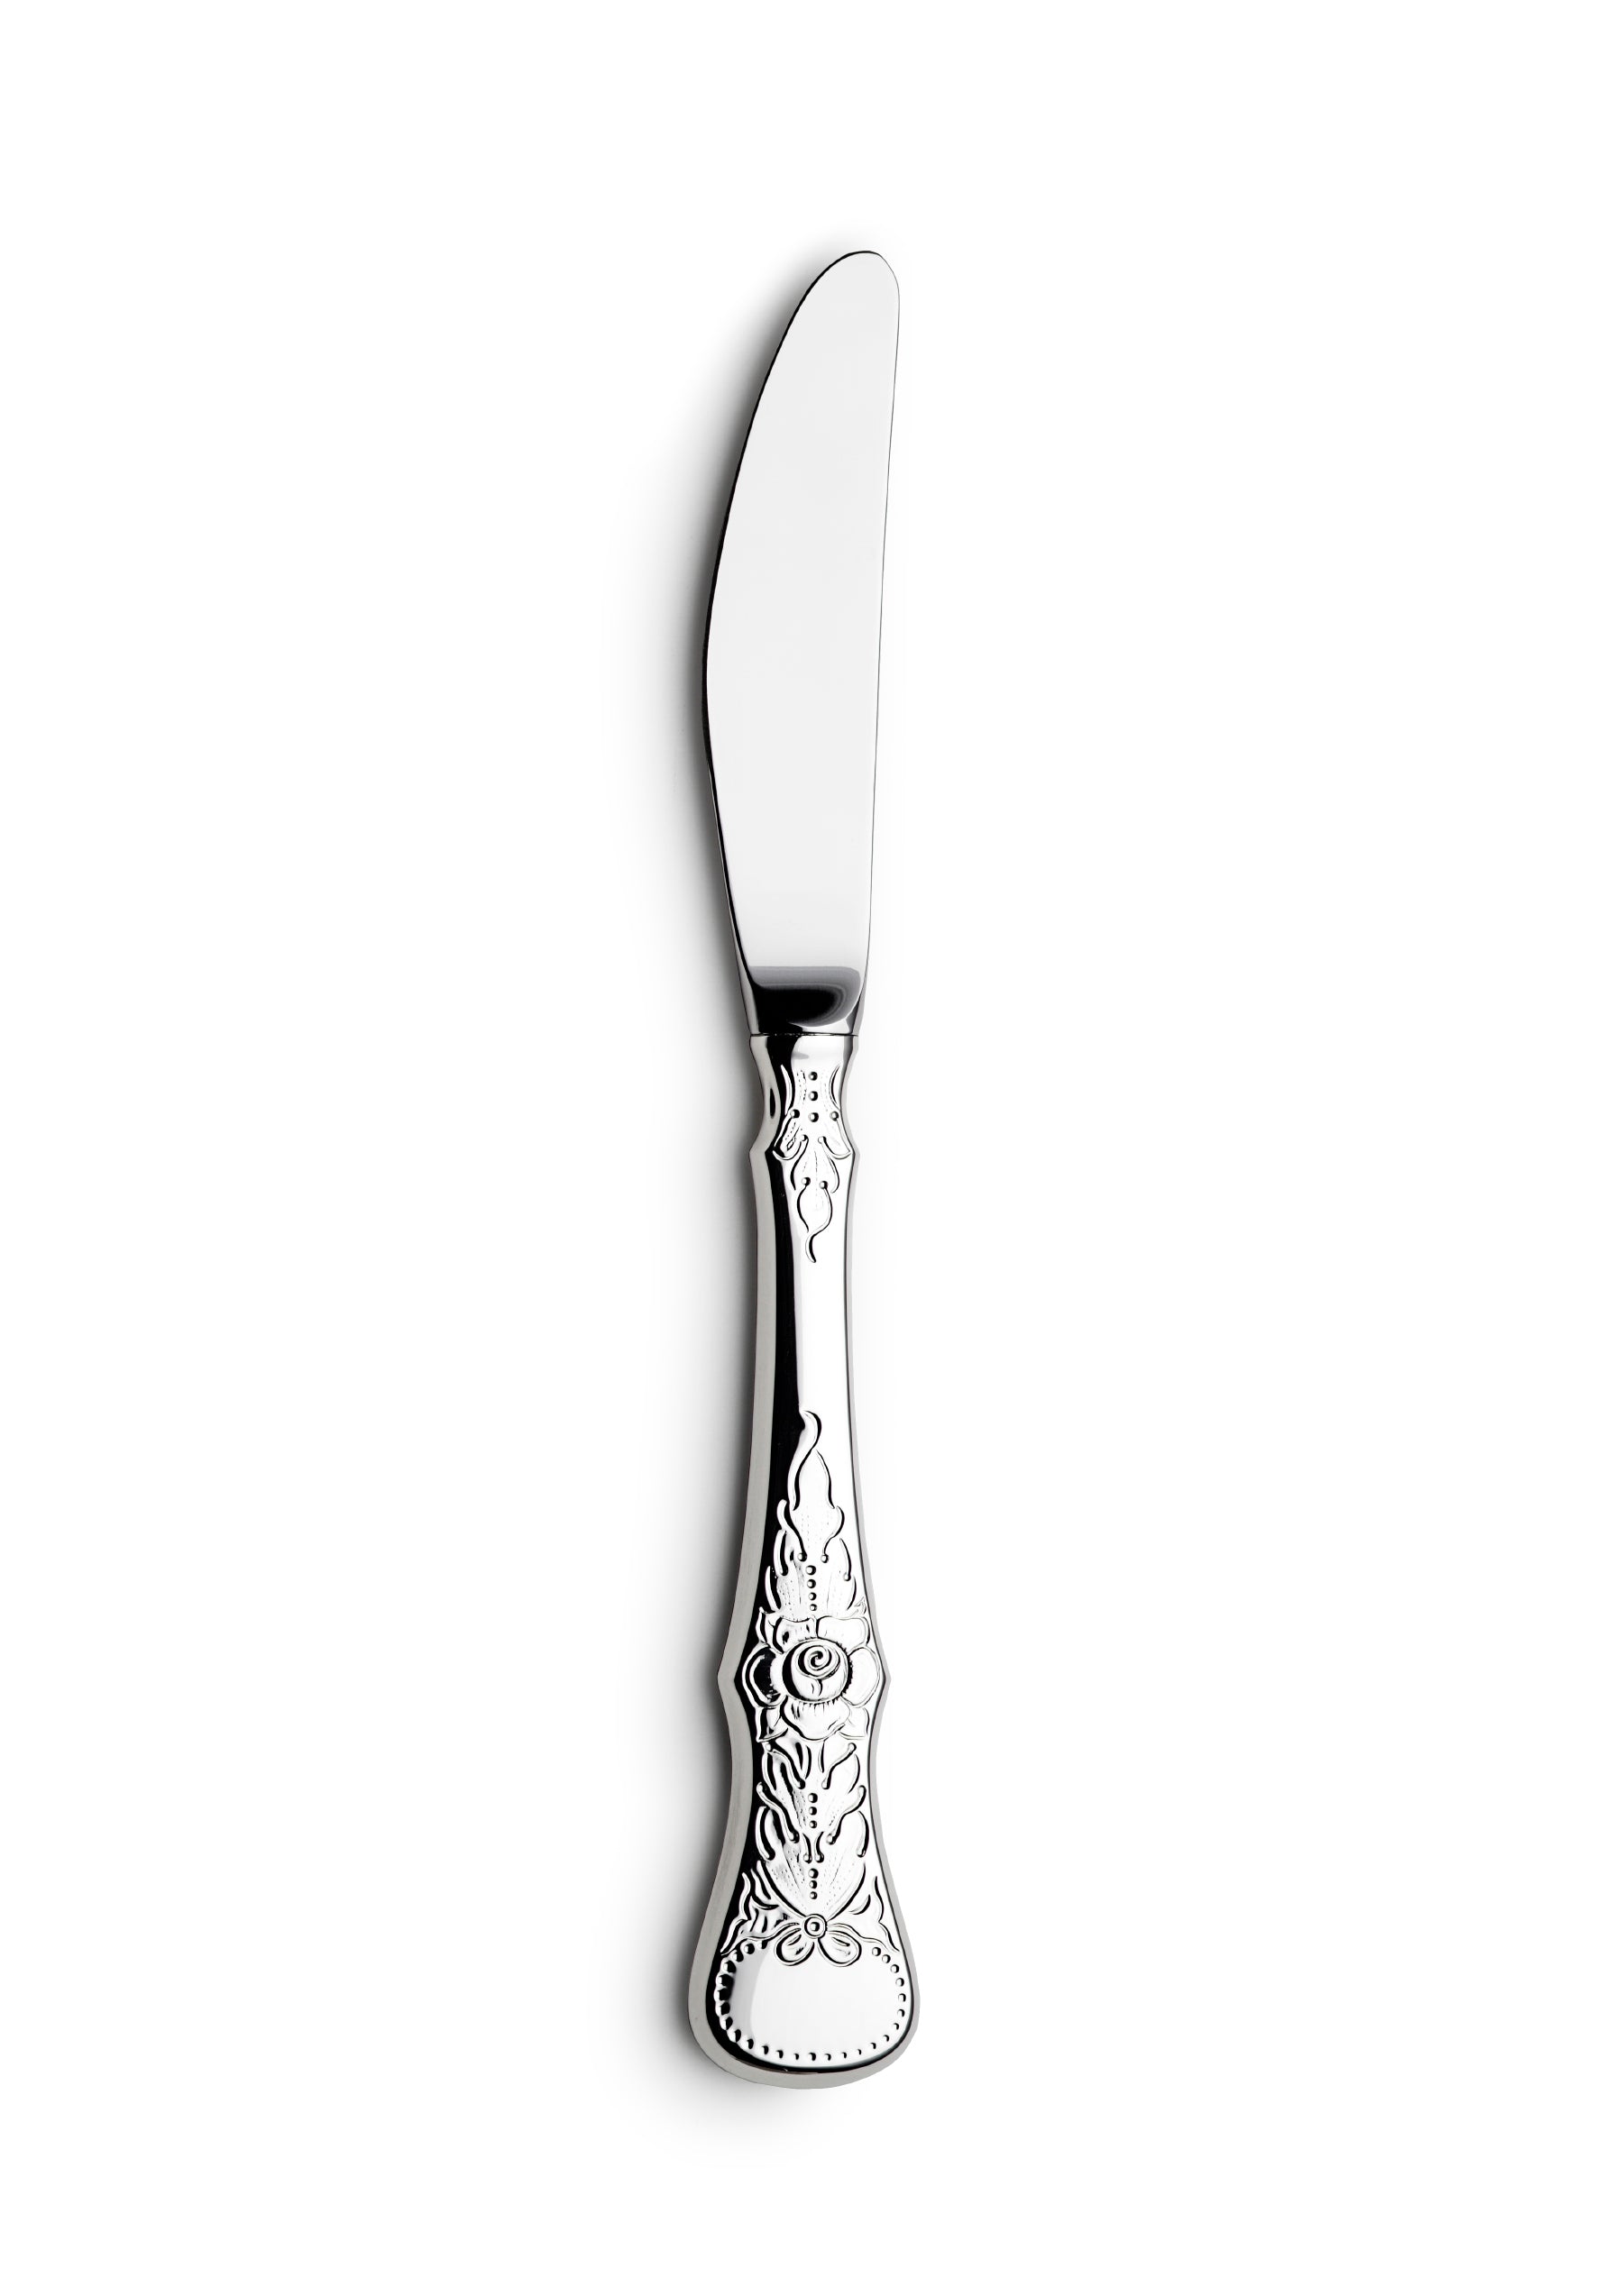 Rose small dining knife with long handle